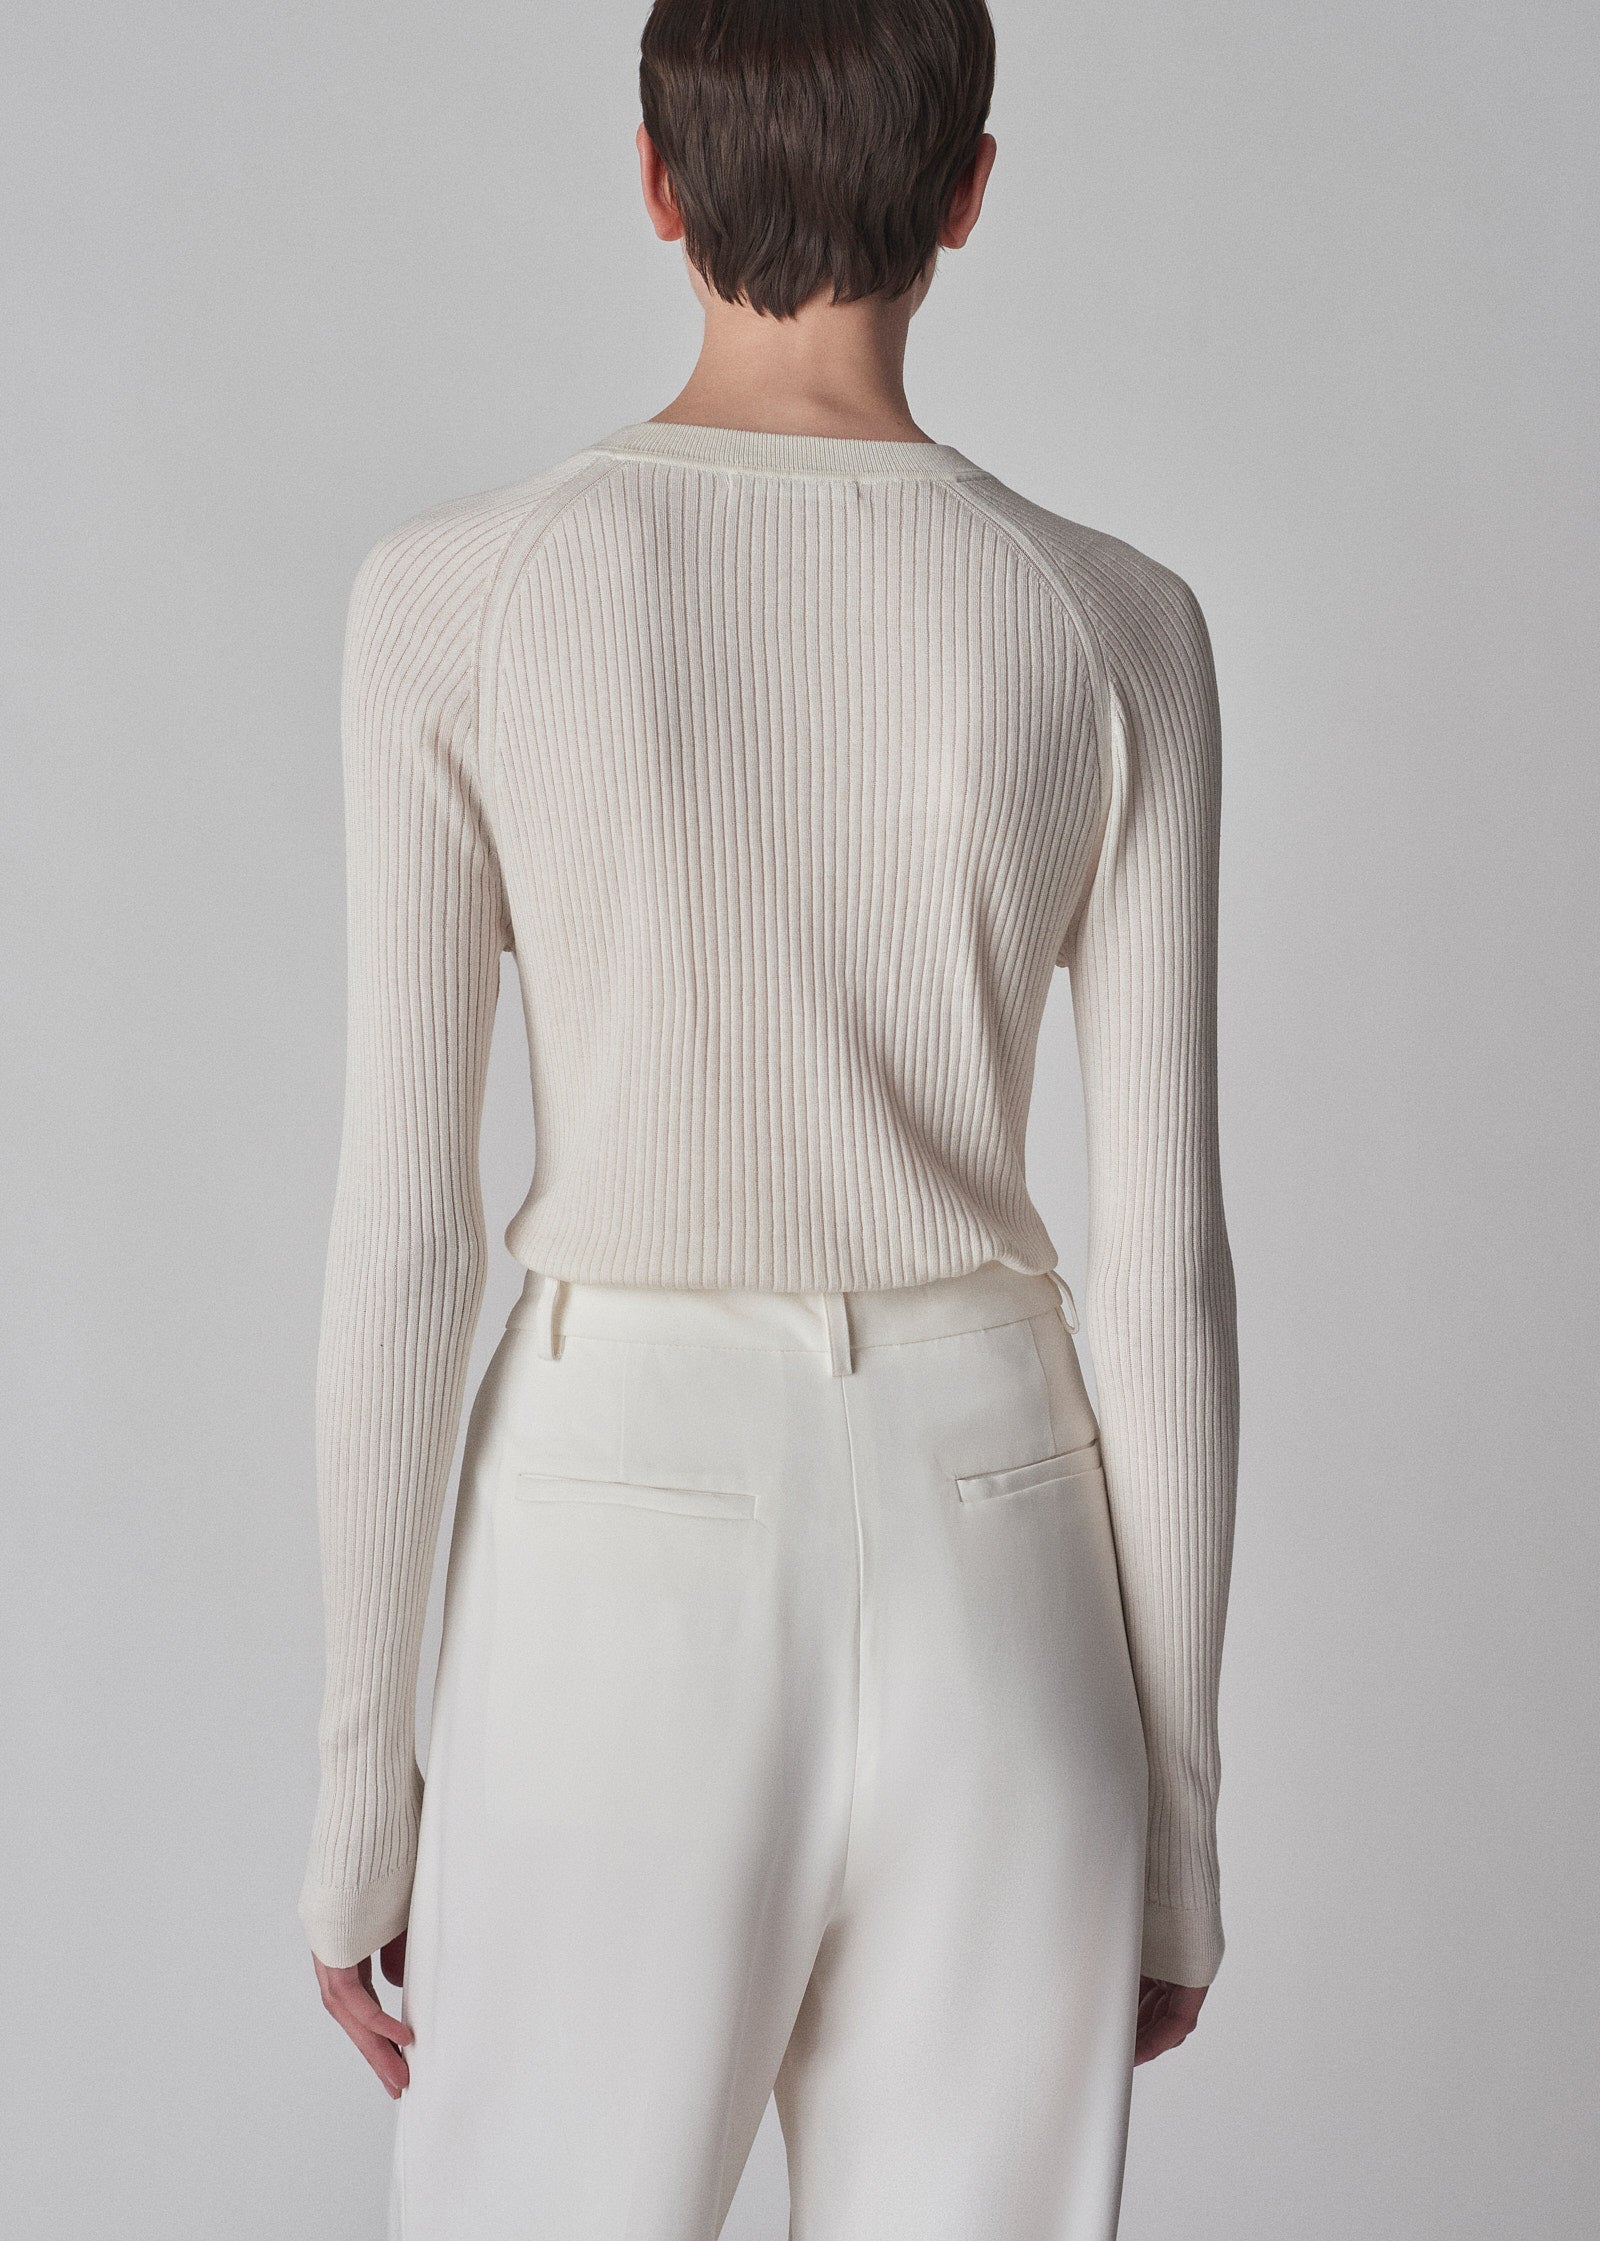 Long Sleeve Fitted Tee in Silk Knit - Ivory - CO Collections